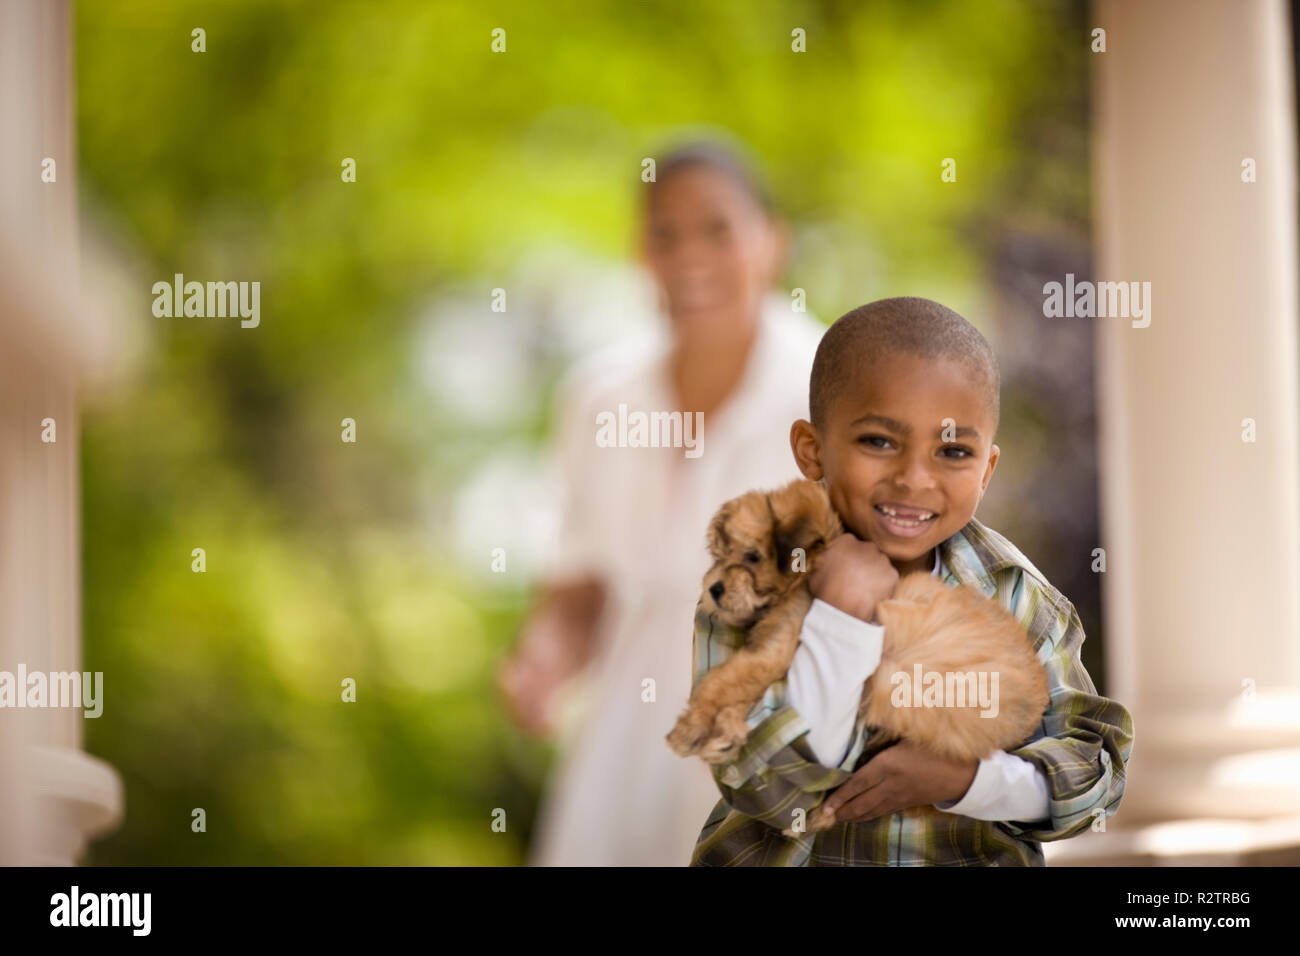 Little boy cuddles a puppy while his mother looks on from the background. Stock Photo